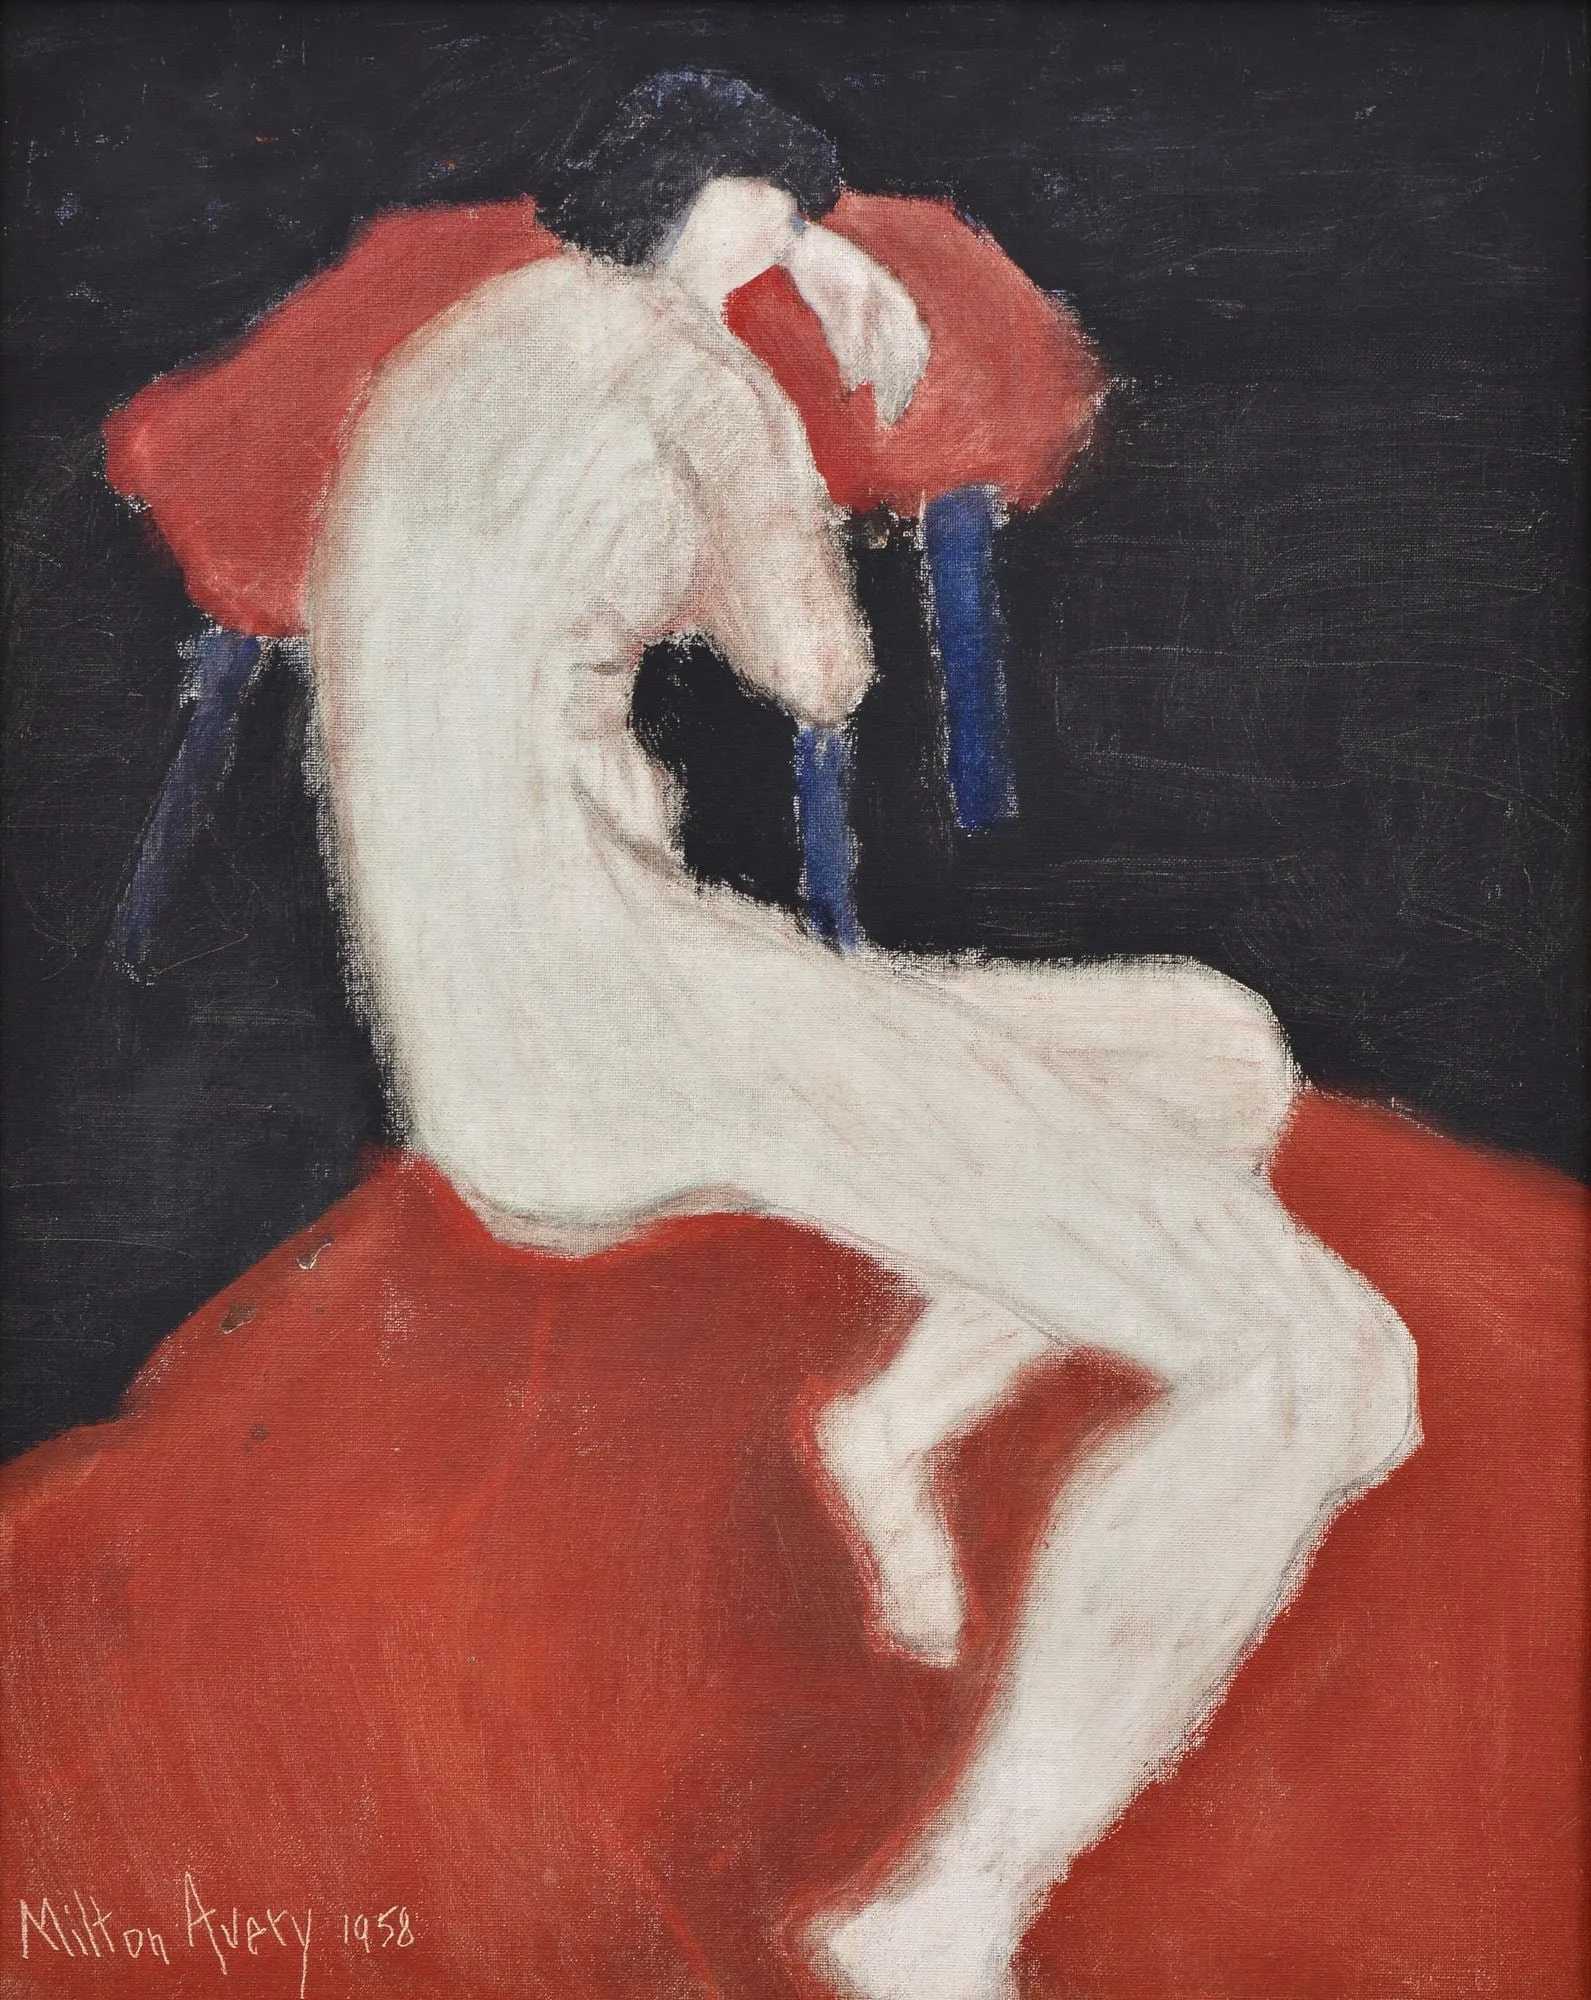 Milton Avery, 'Red Rug', estimated at $75,000-$125,000 at Palm Beach Modern Auctions.